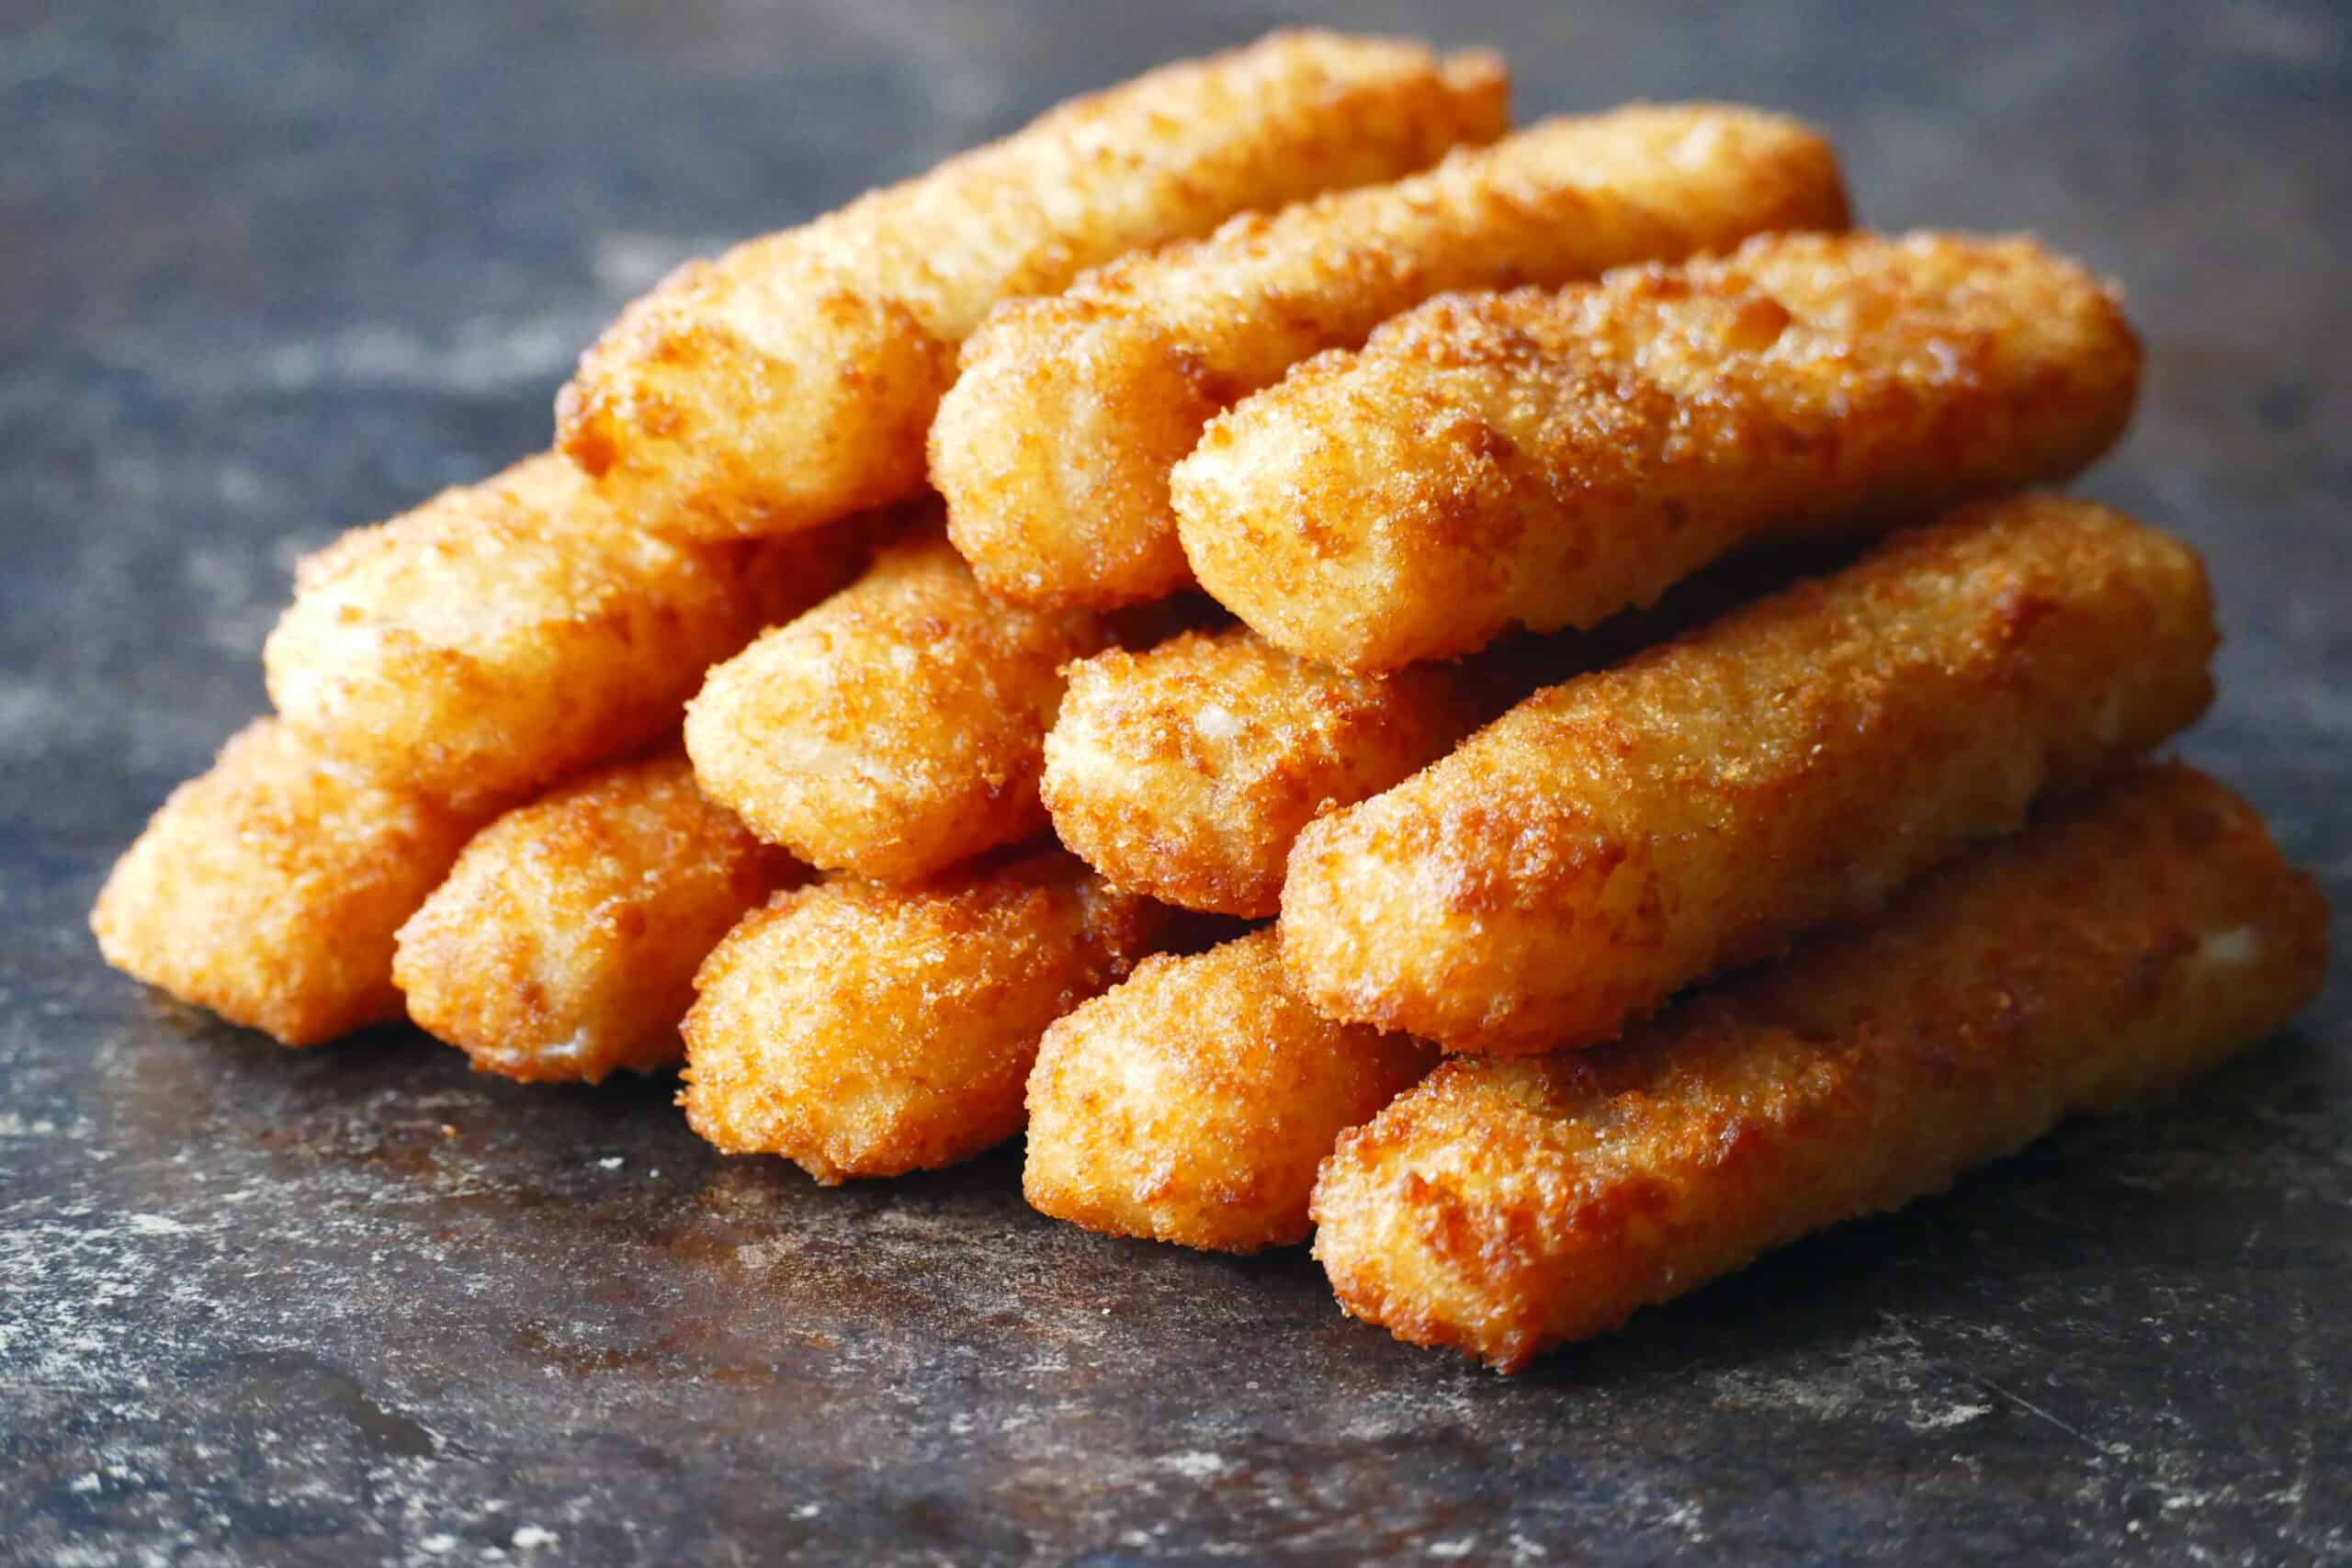 20-nutrition-facts-about-fish-sticks